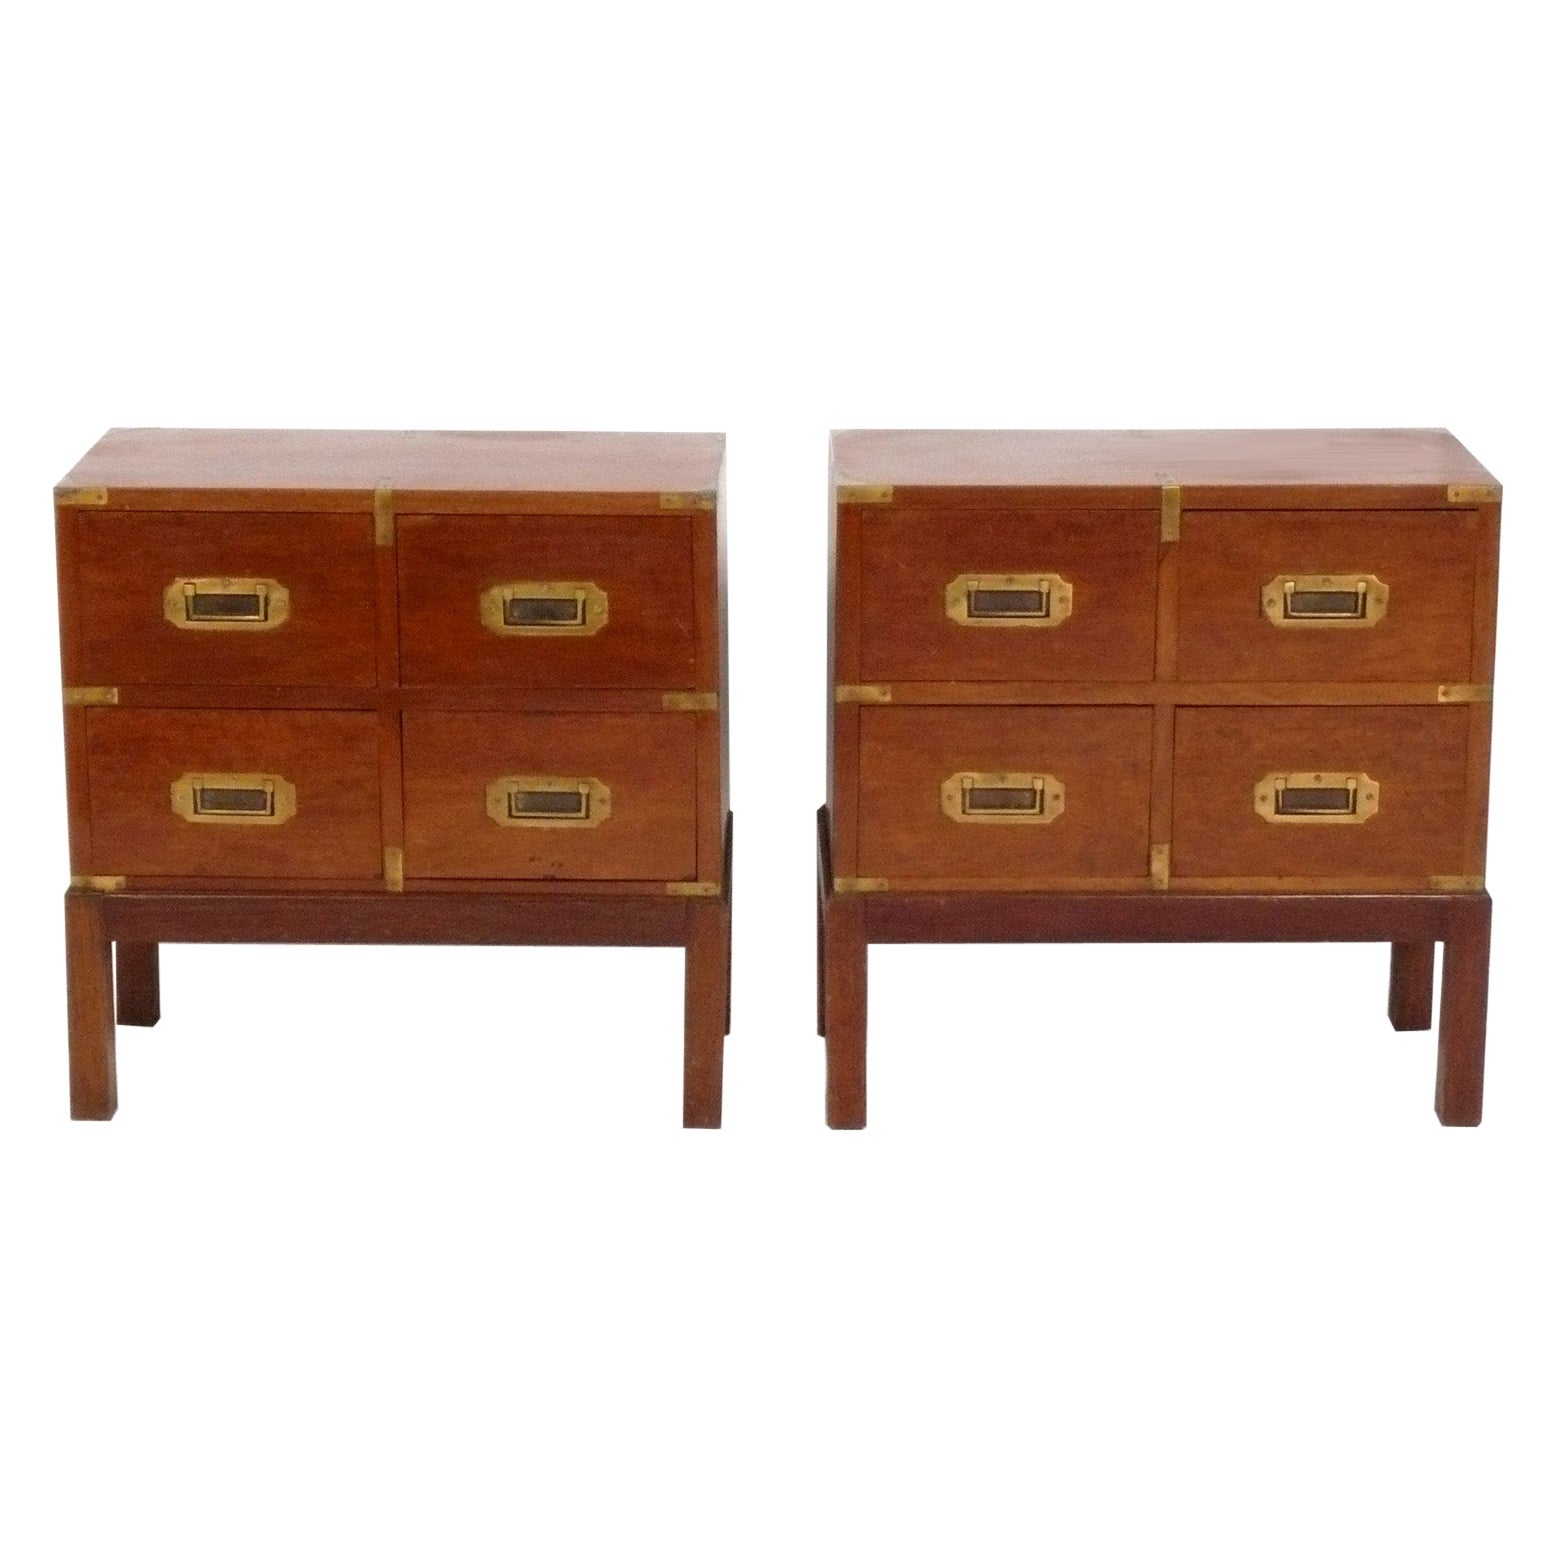 Pair of Campaign End Tables - probably 19th Century English